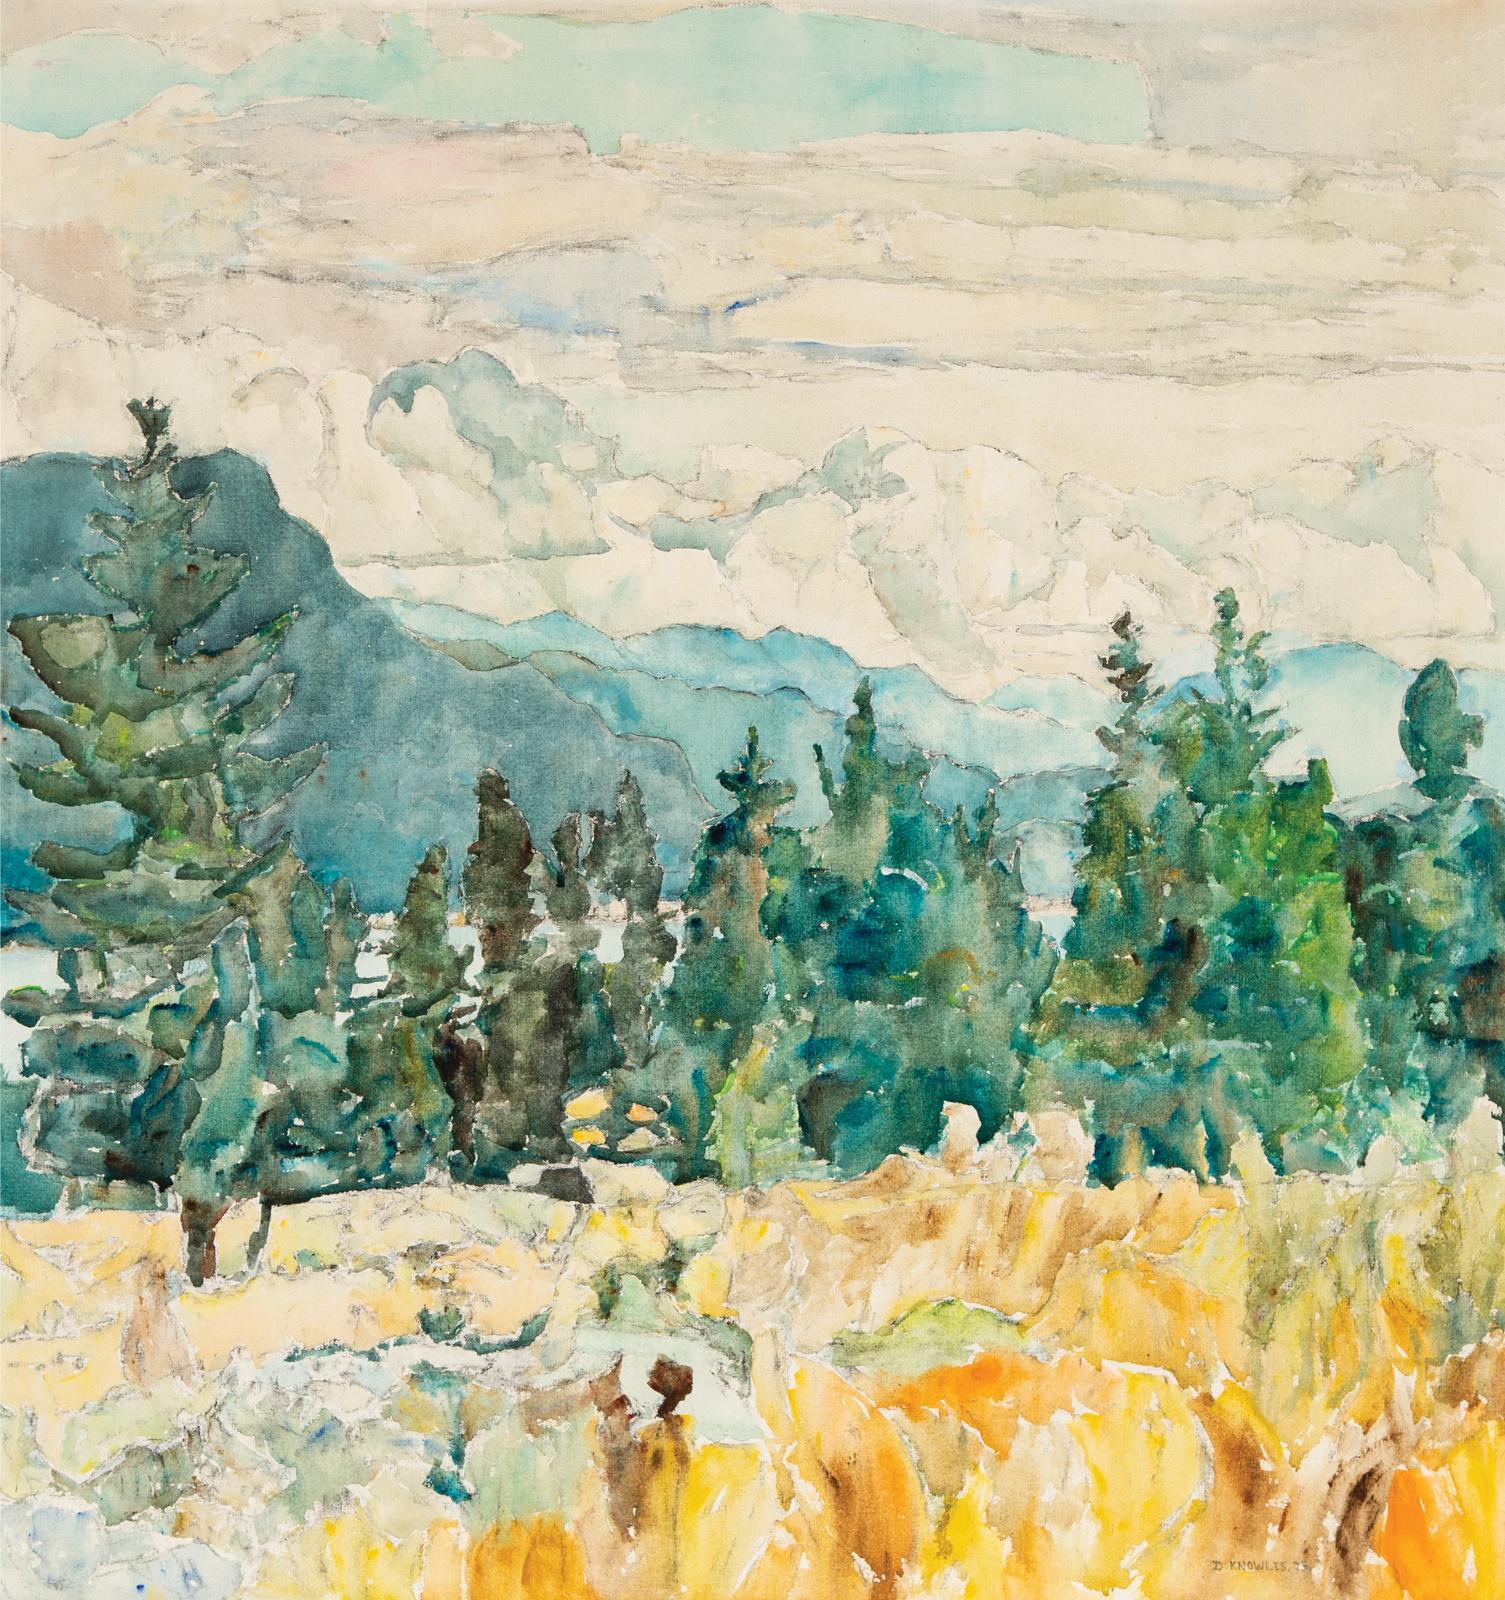 Dorothy Elsie Knowles (1927-2001) - The Trees Form A Screen To Hide The Blue Mountains, 1975